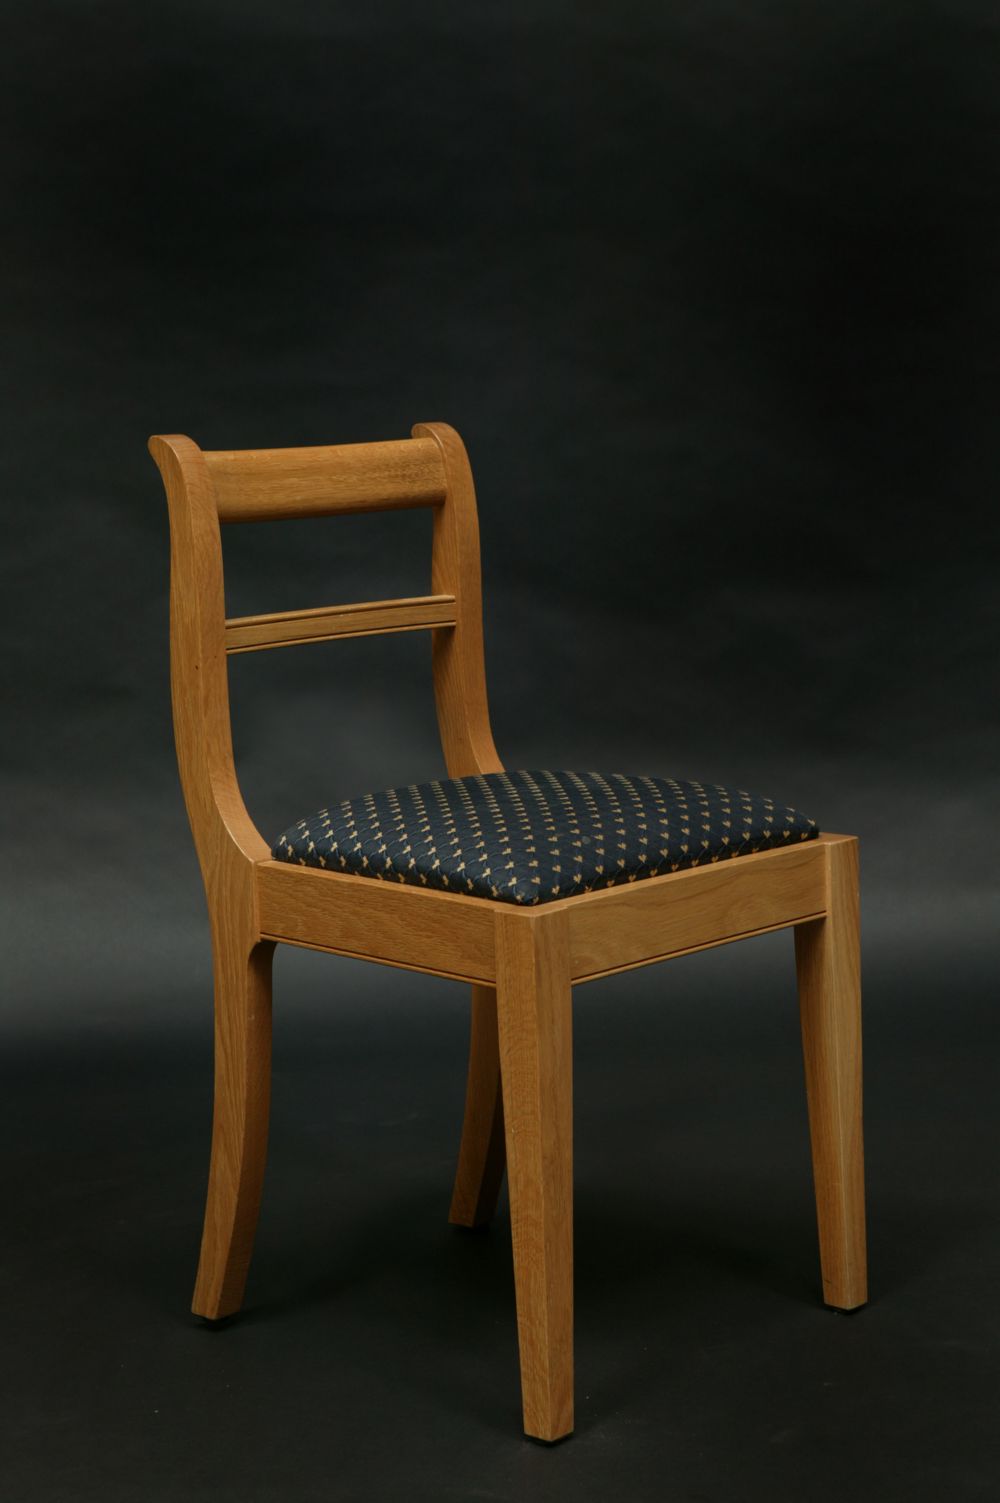 Select Custom Joinery | Low rise chair